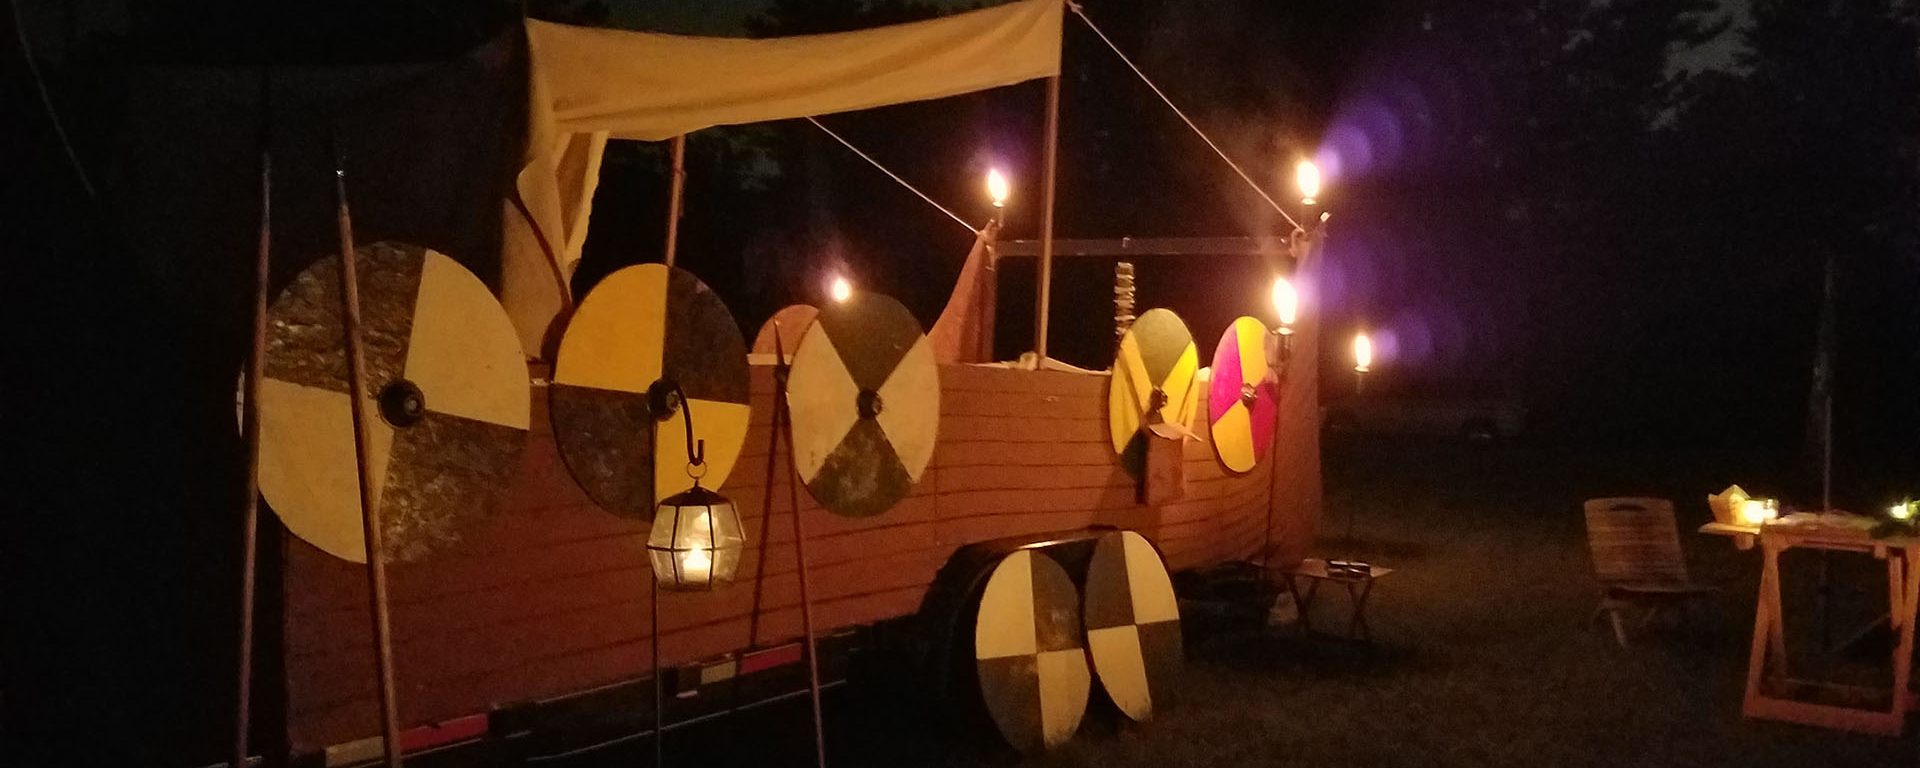 Trailer made up as Viking boat with pavilion